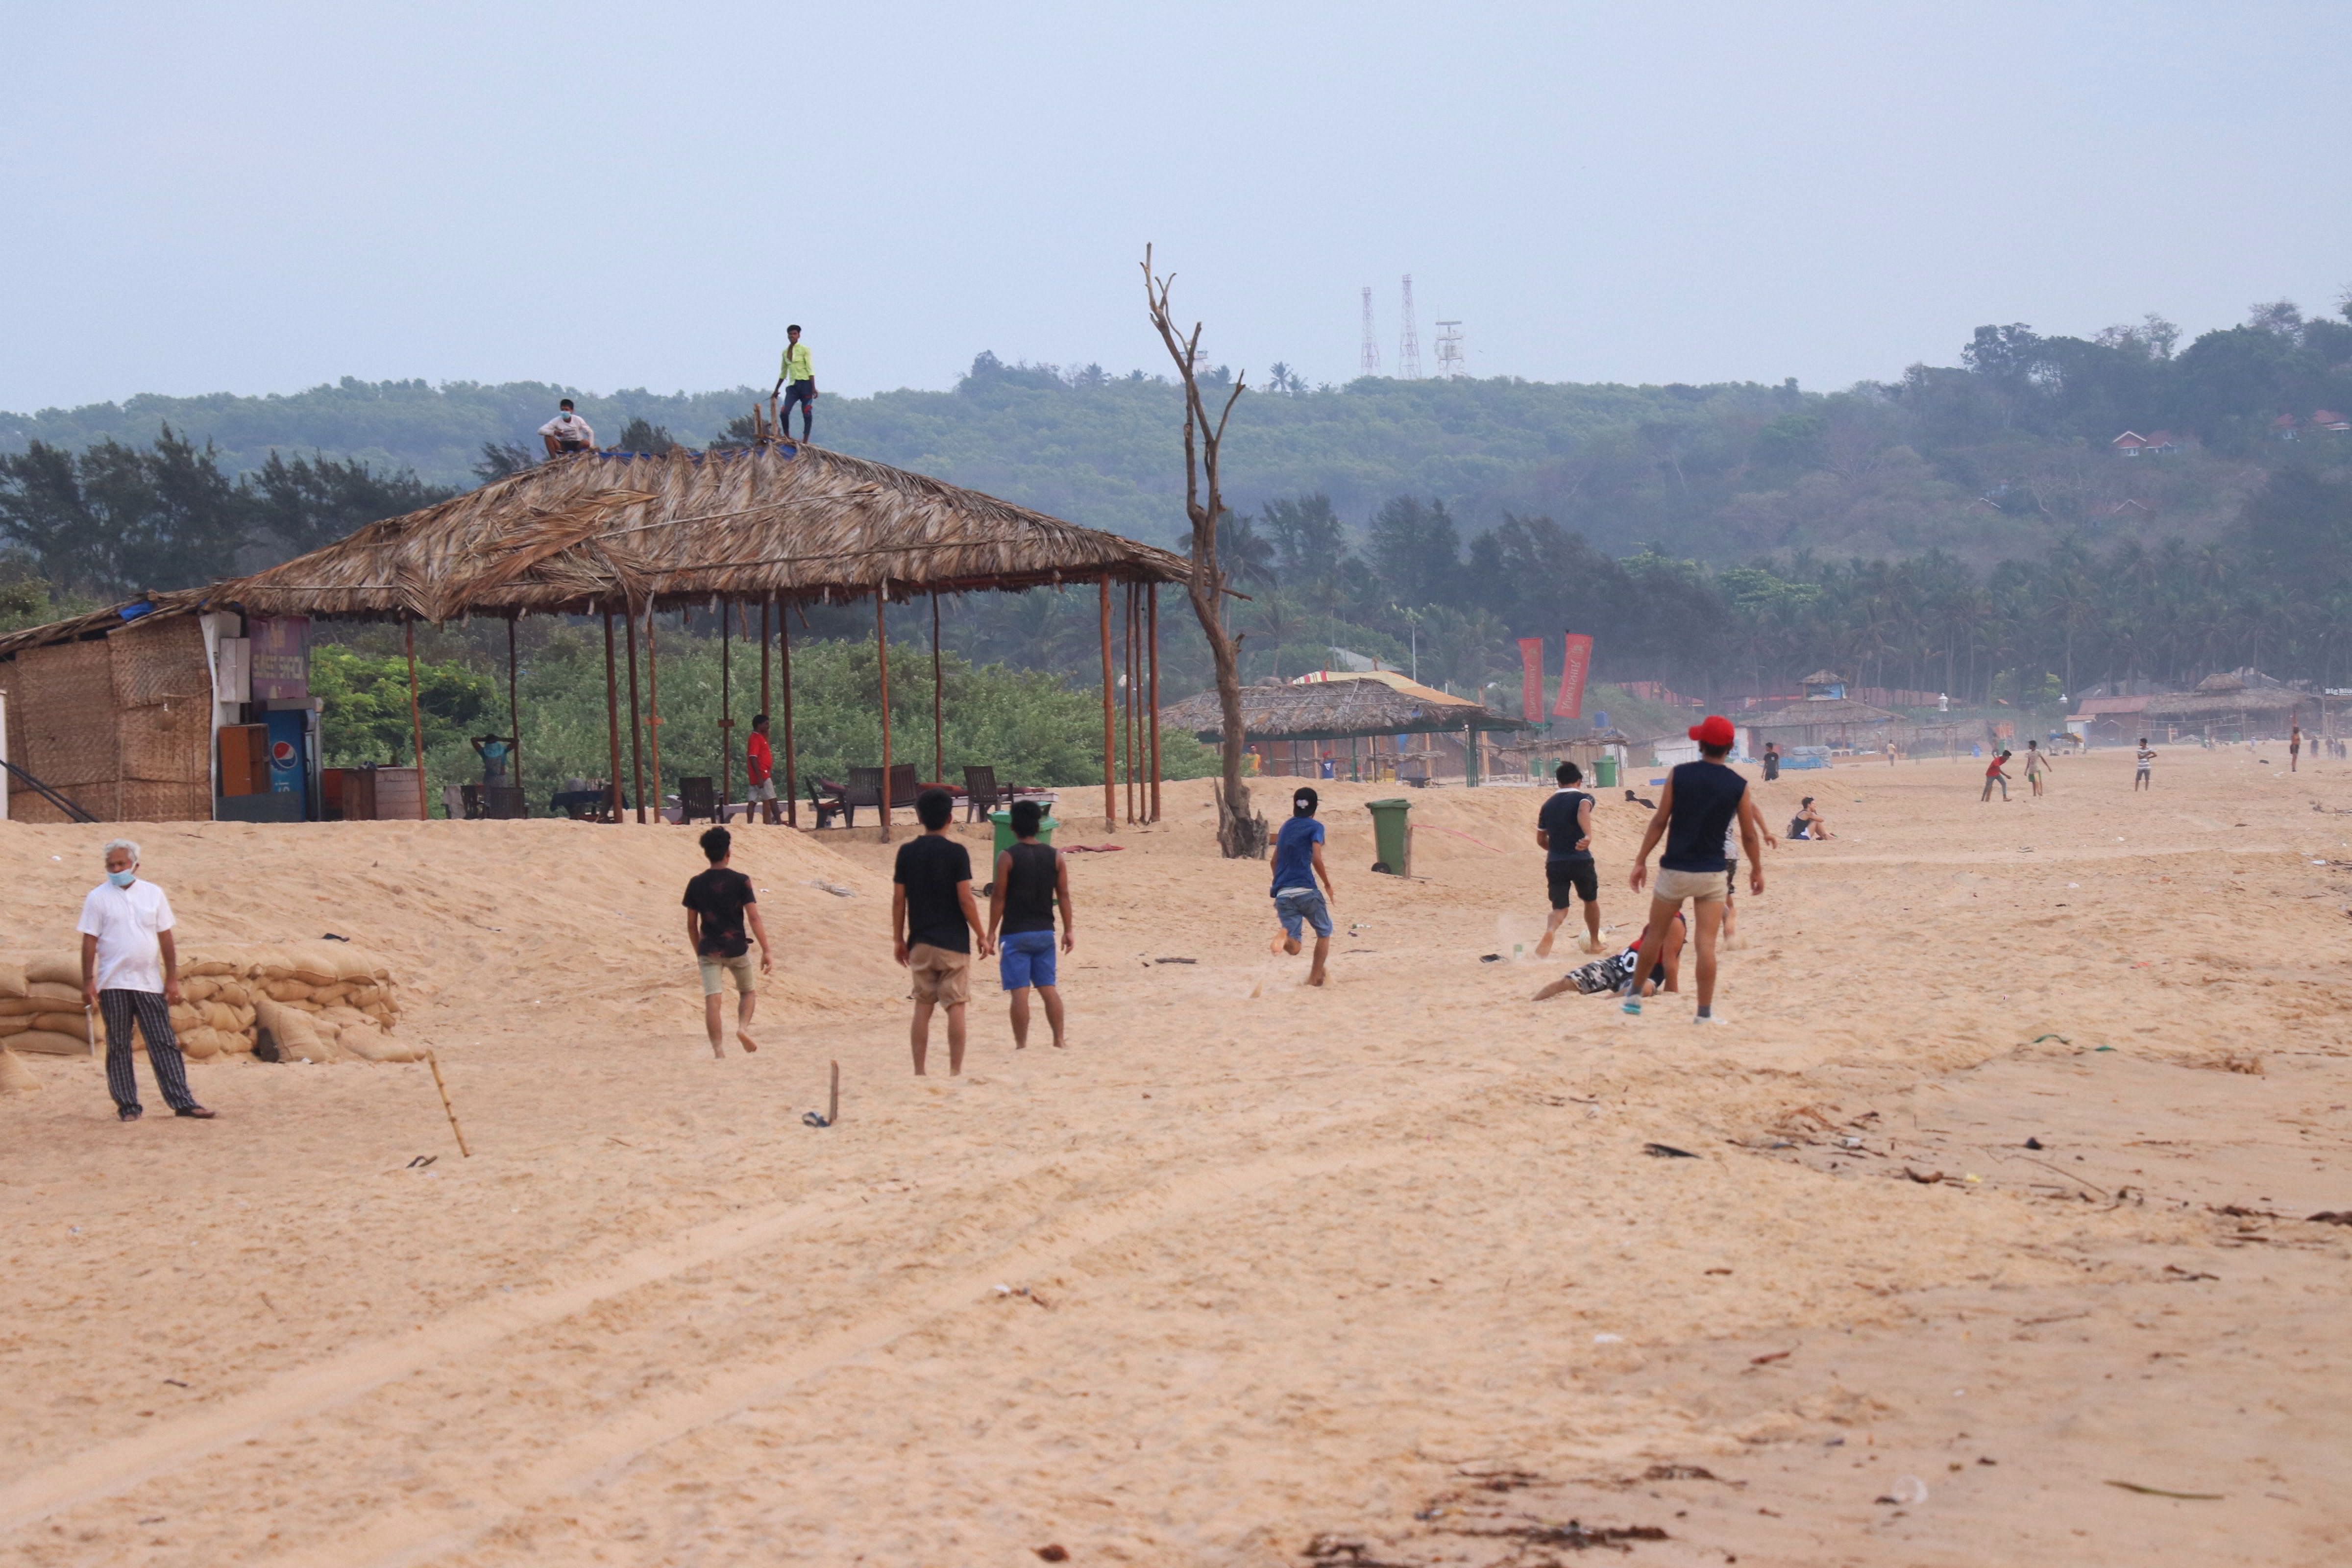 Candolim beach wears a nearly deserted look during a nationwide lockdown in the wake of coronavirus outbreak, in North Goa. (Credit: PTI)